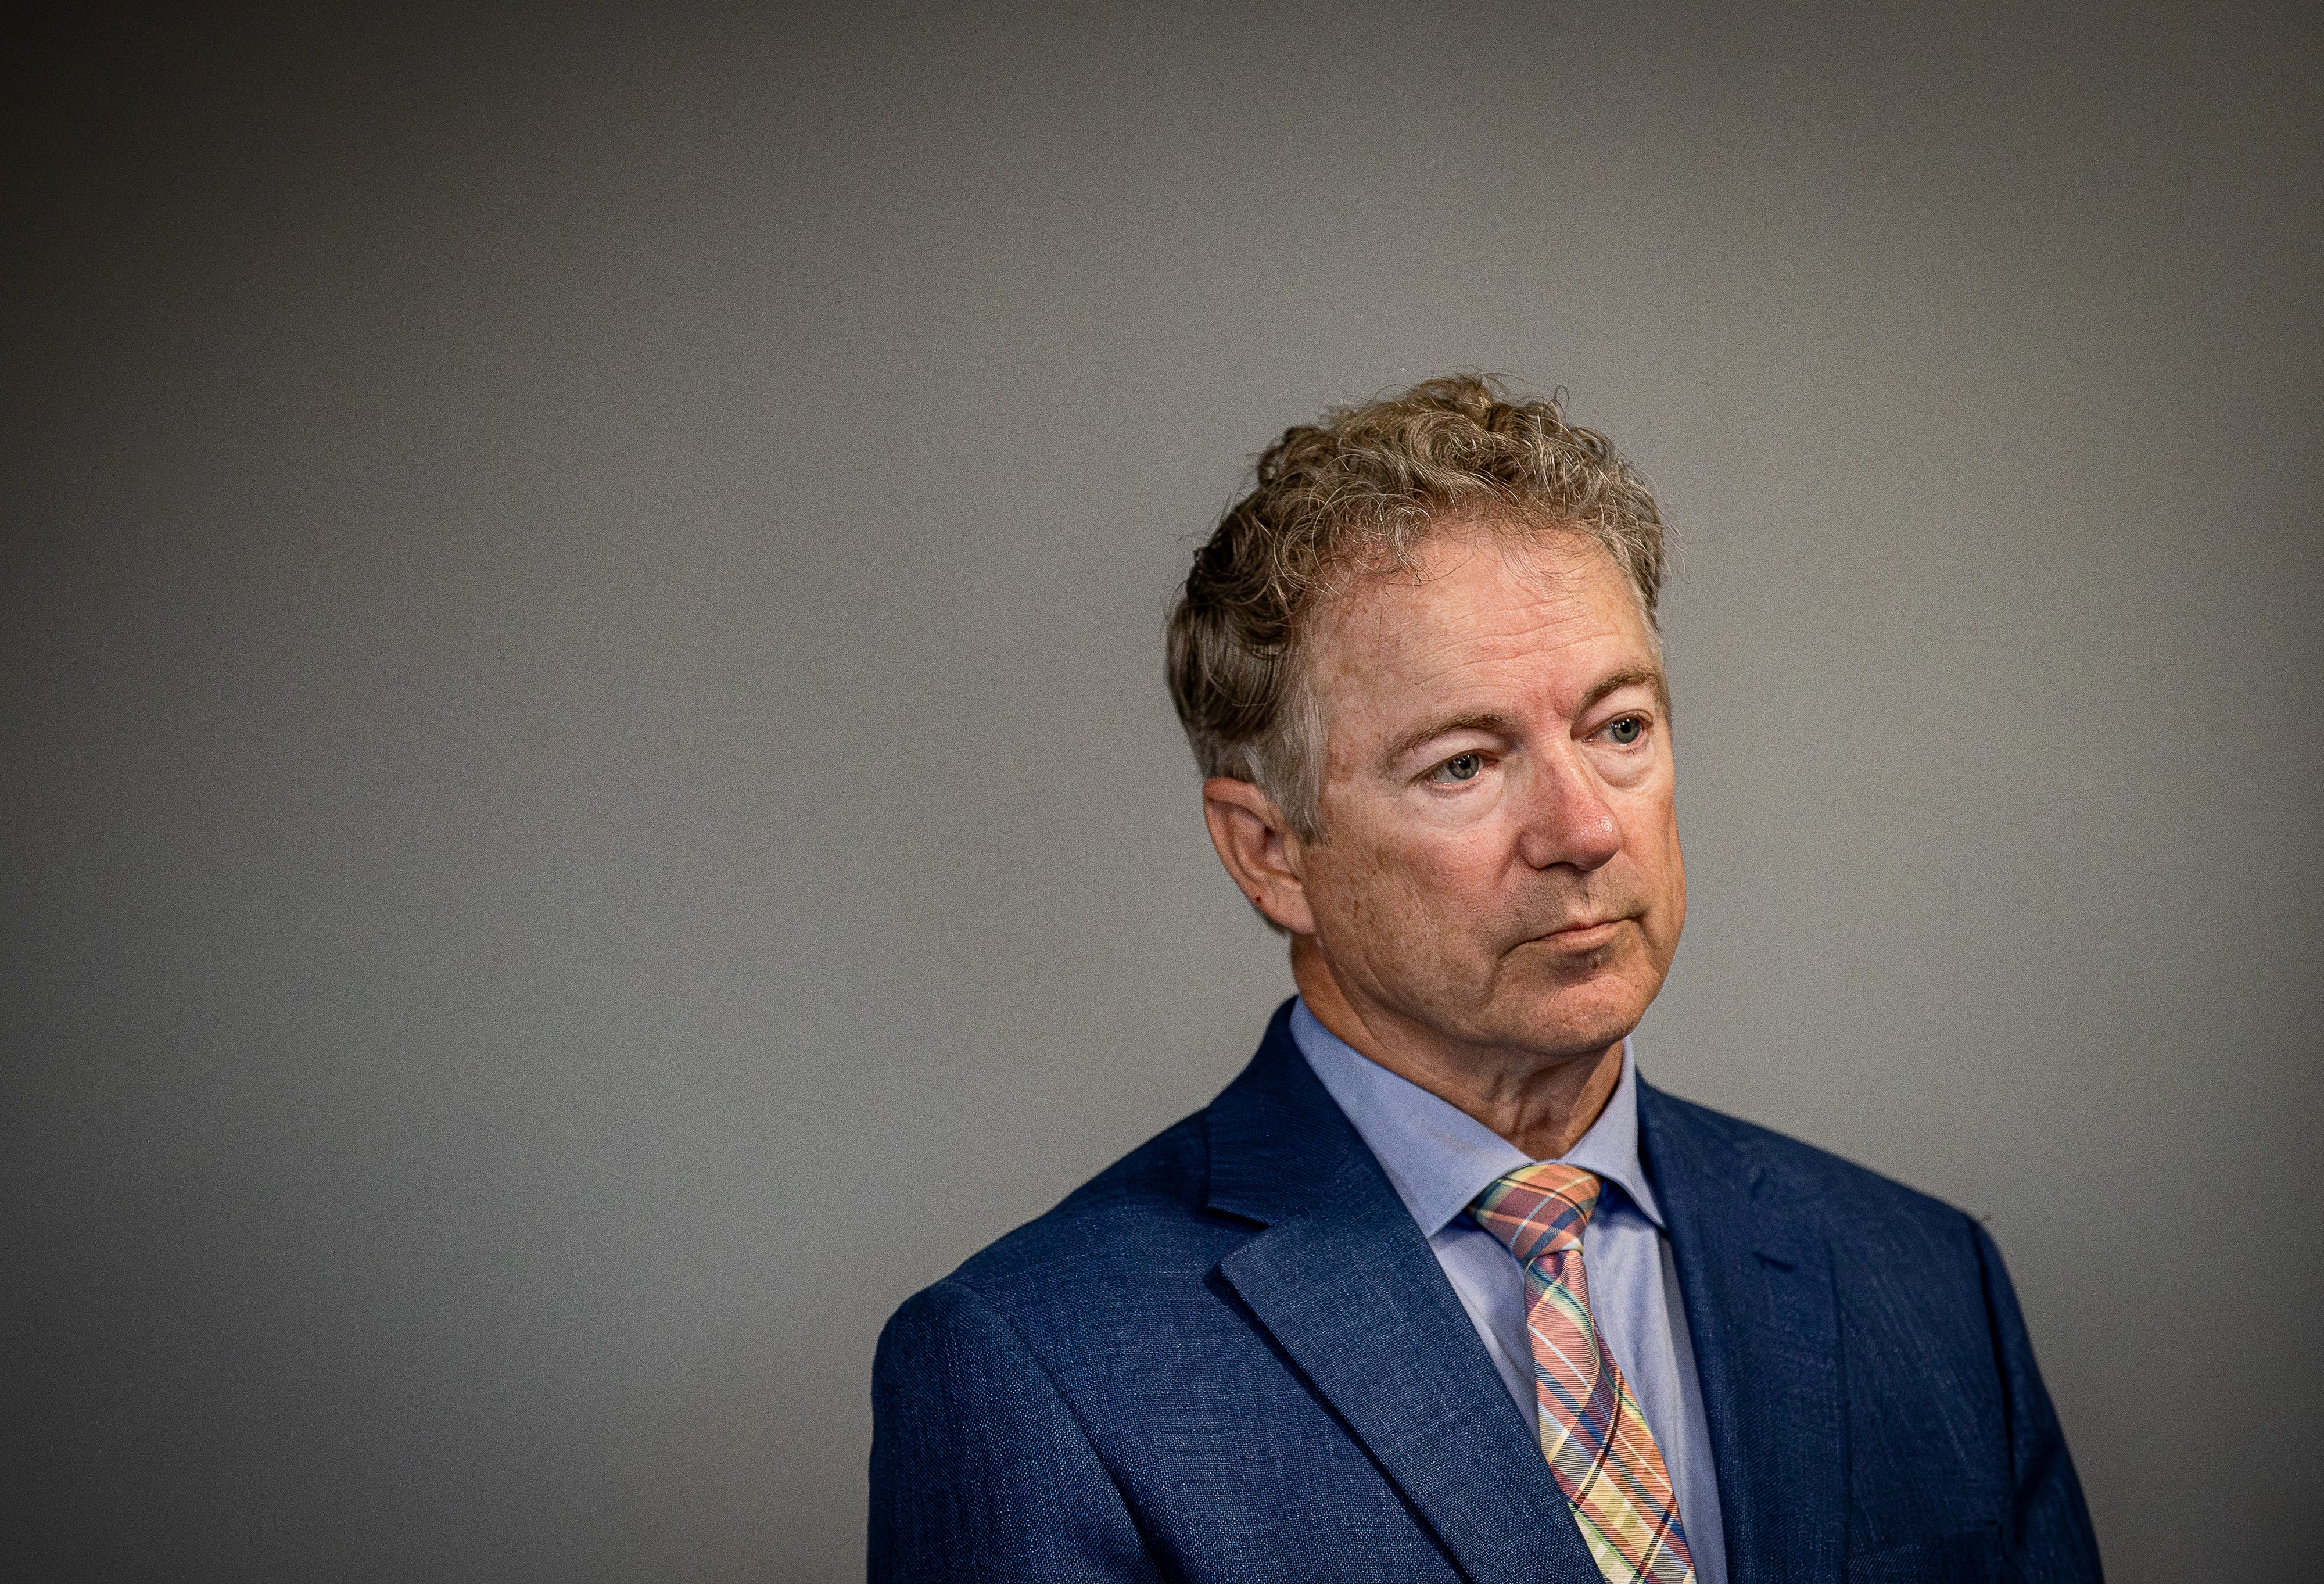 Rand Paul is wrong about Ukraine. I have lived in Putin’s shadow, and America must help.